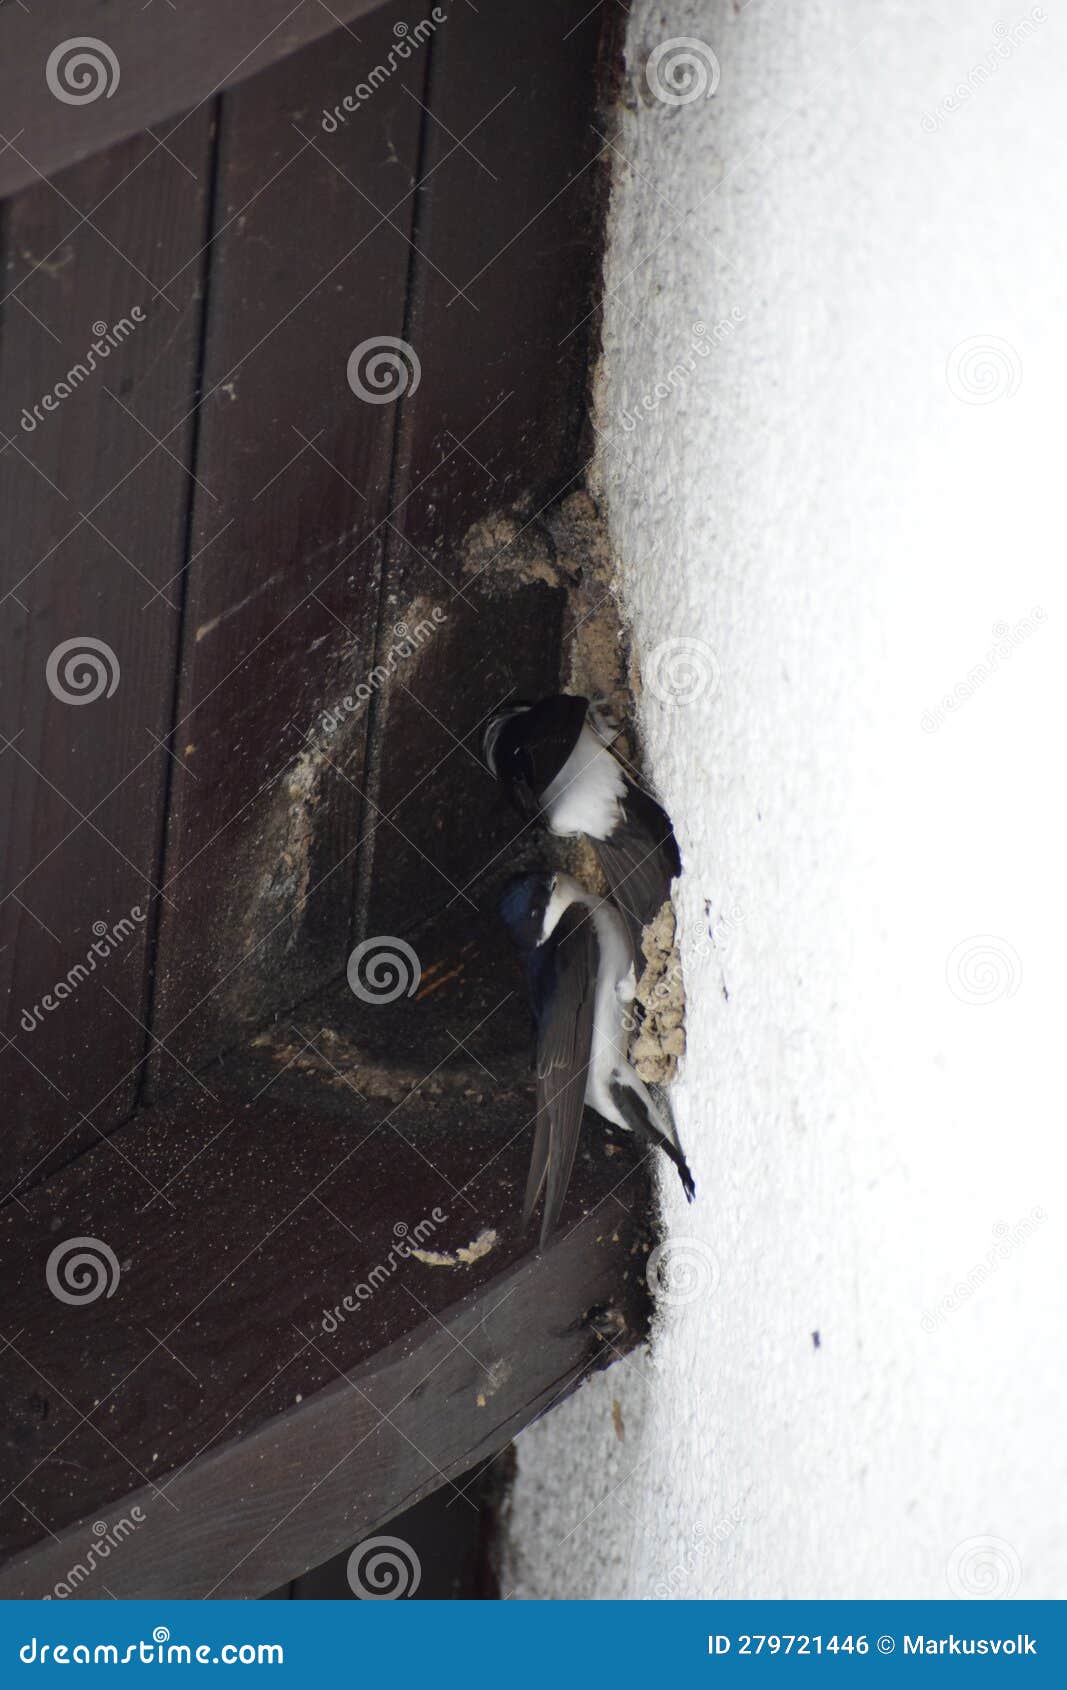 swallow couple starting to build a nest